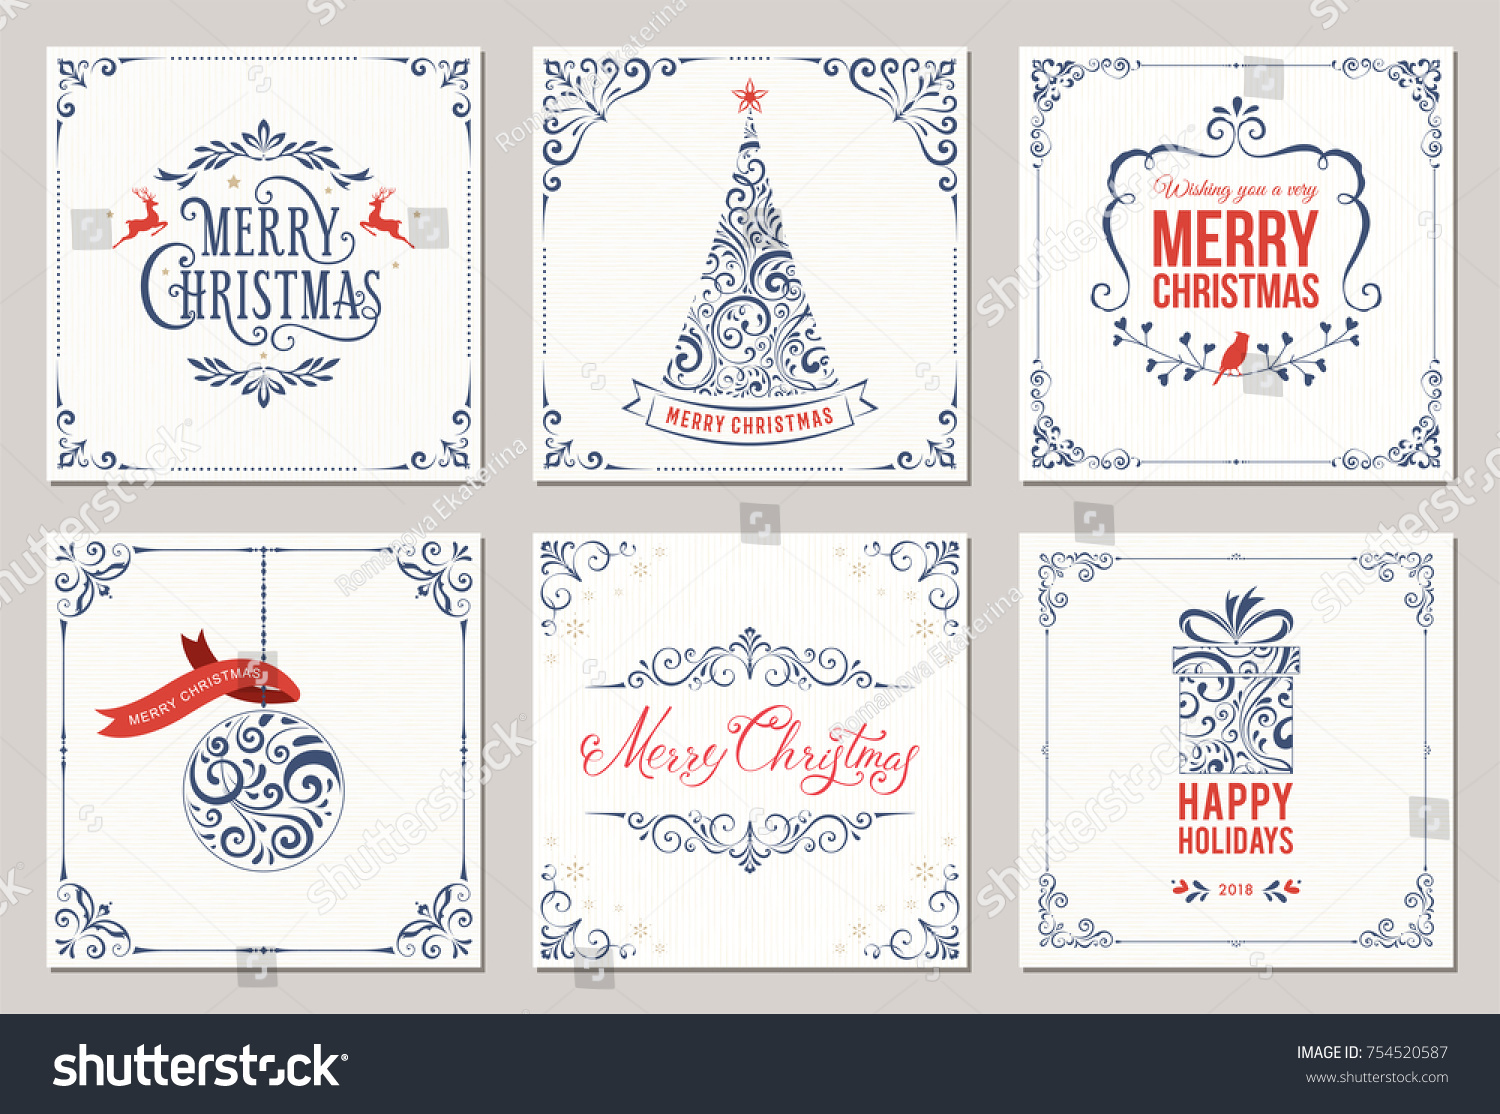 Ornate square winter holidays greeting cards with New Year tree, gift box, Christmas ornaments, swirl frames and typographic design. Vector illustration. #754520587